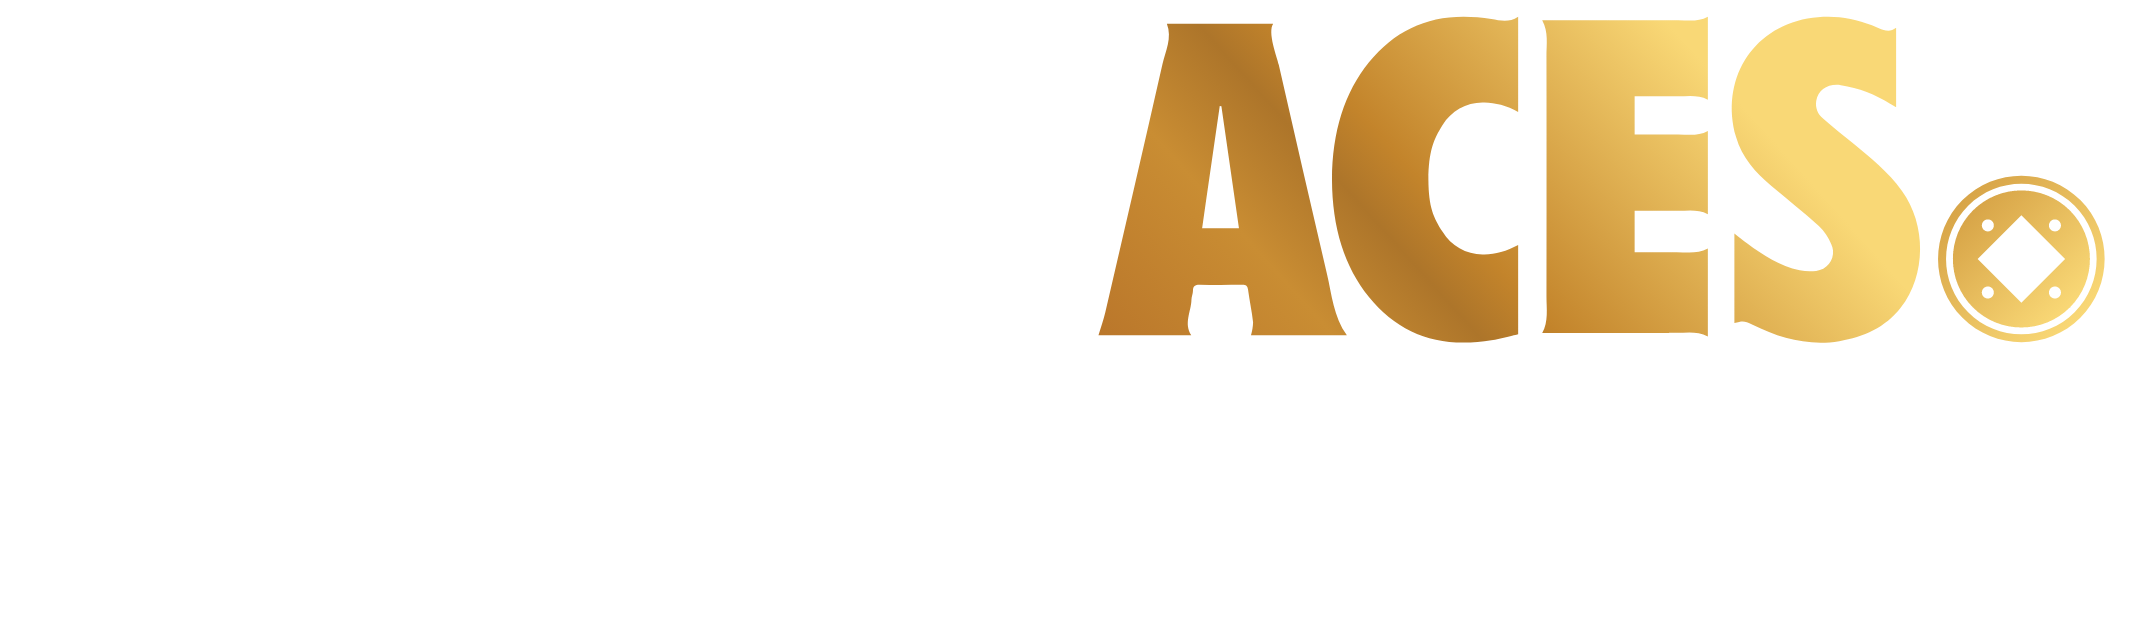 The Lucky Aces Club logo featuring a spade with the club's name in white letters on a black background.